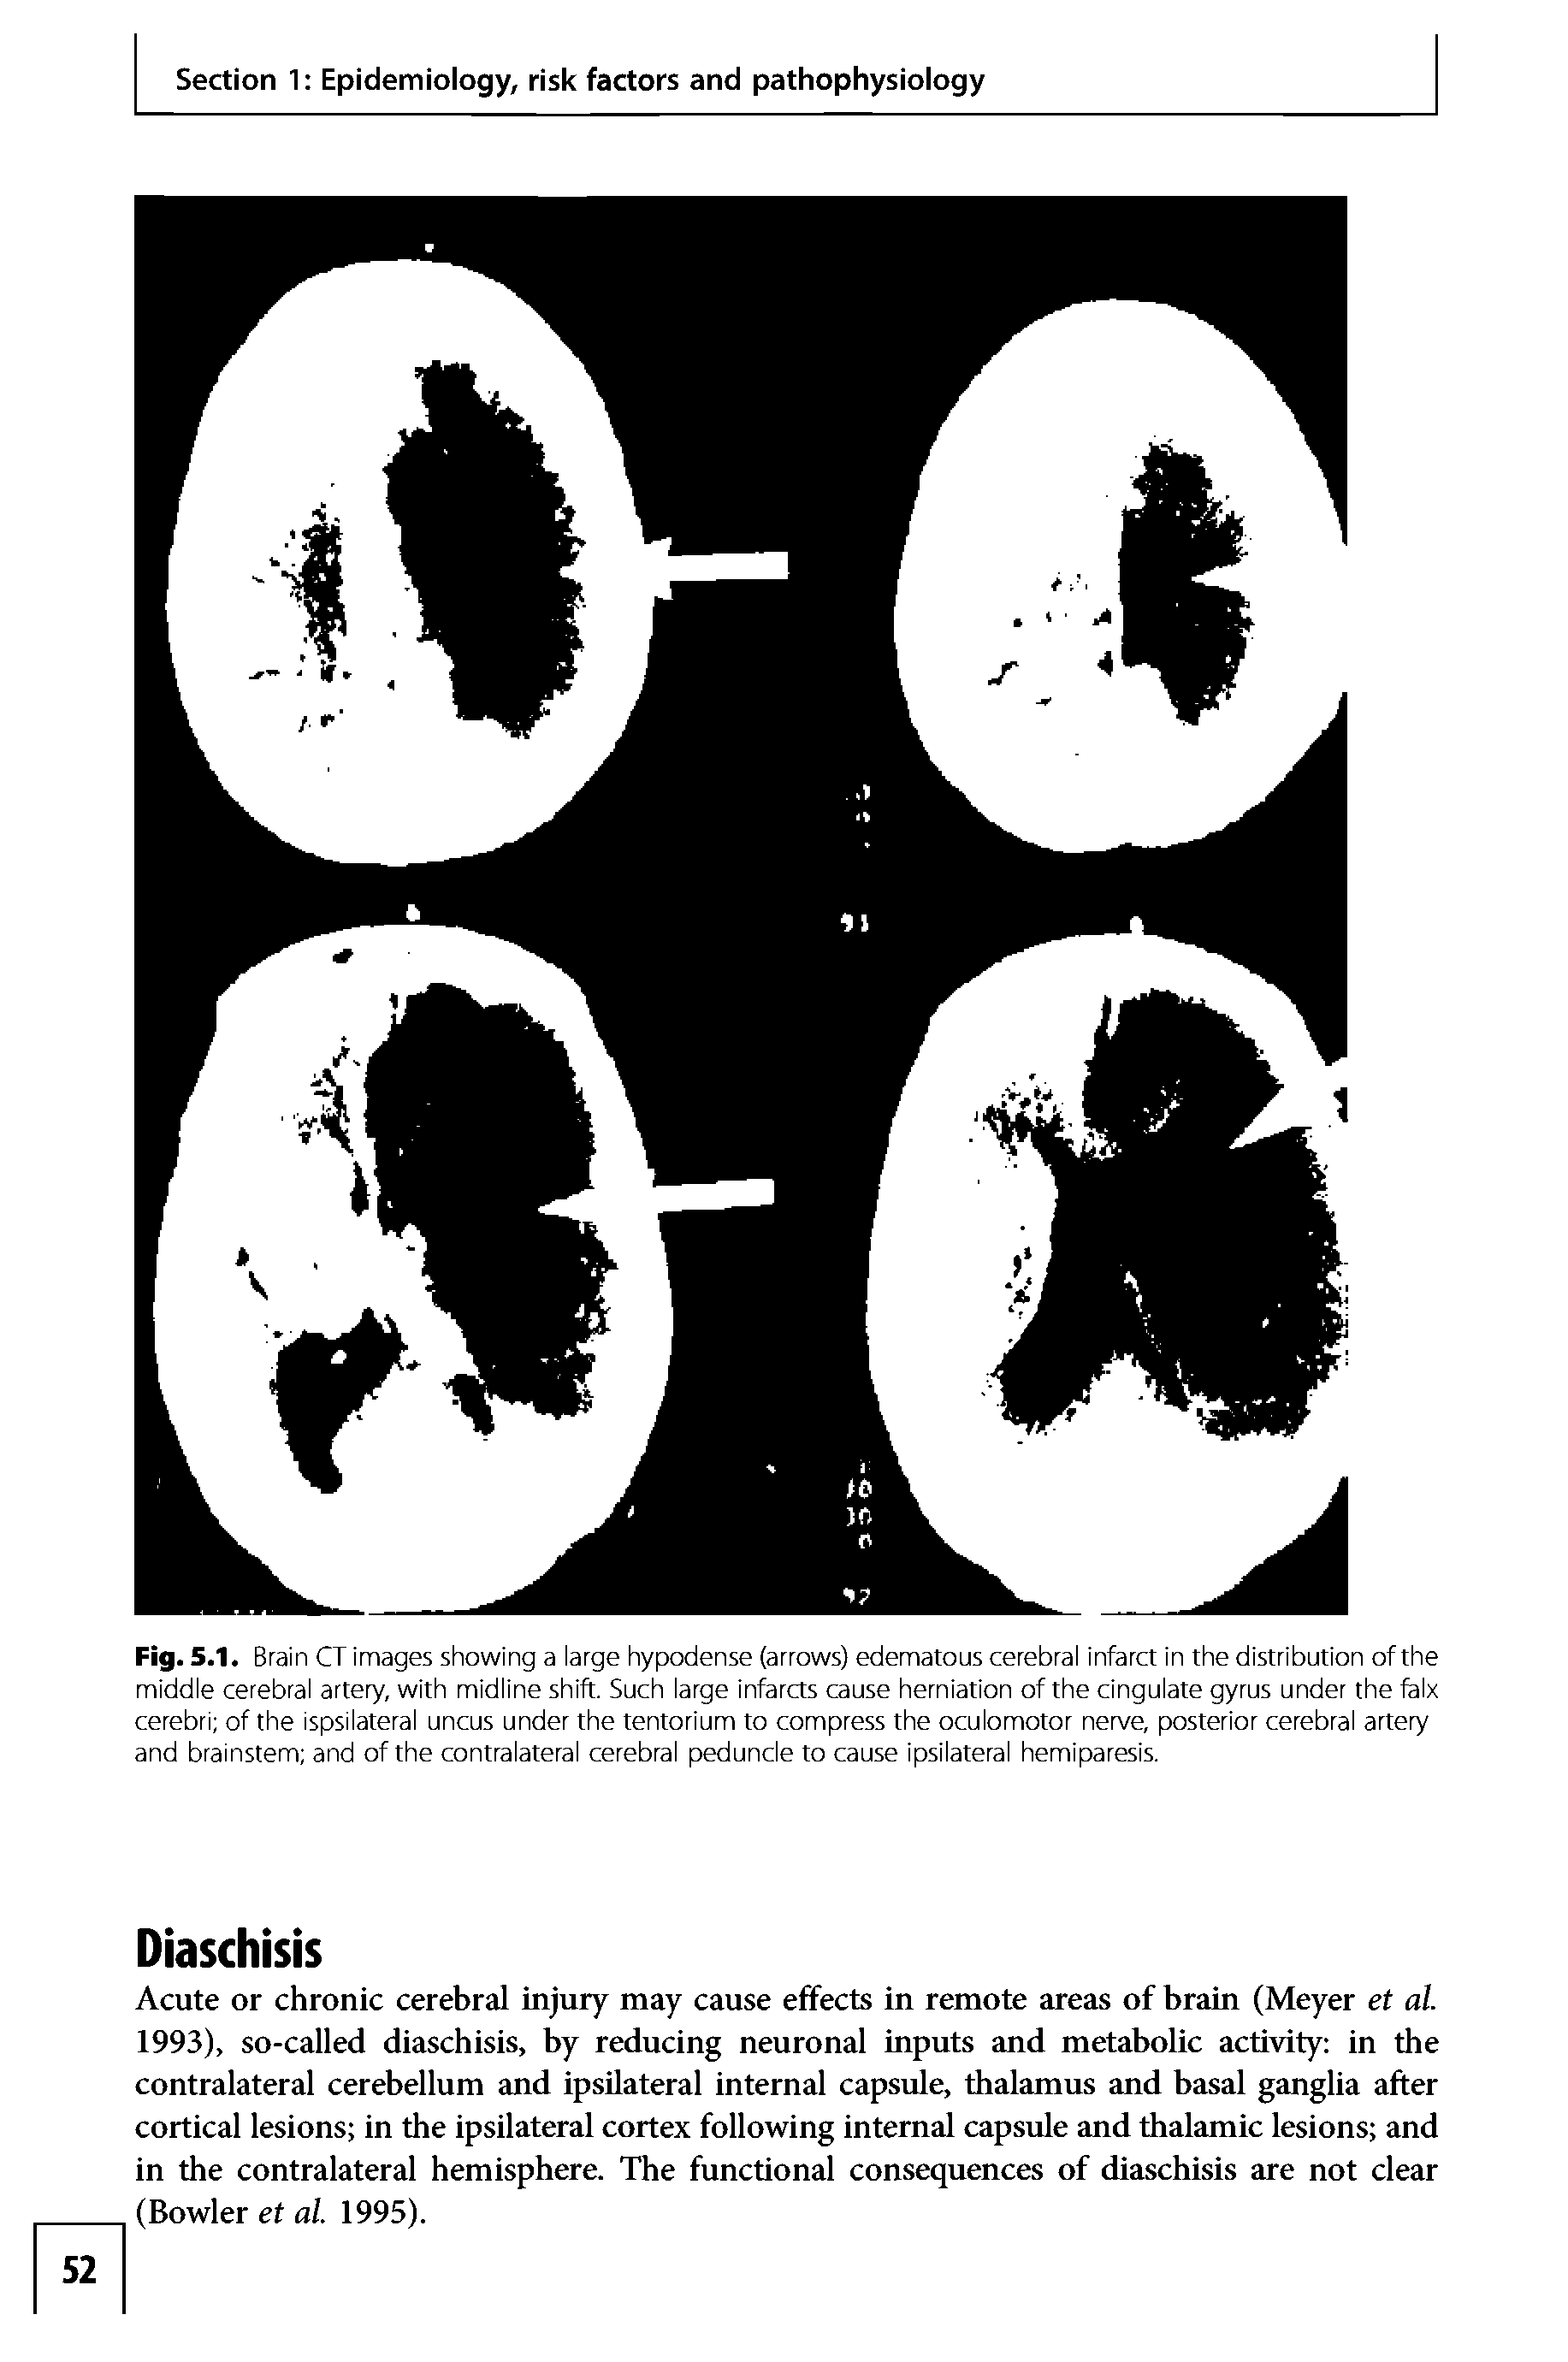 Fig. 5.1. Brain CT images showing a large hypodense (arrows) edematous cerebral infarct in the distribution of the middle cerebral artery, with midline shift. Such large infarcts cause herniation of the cingulate gyrus under the falx cerebri of the ispsilateral uncus under the tentorium to compress the oculomotor nerve, posterior cerebral artery and brainstem and of the contralateral cerebral peduncle to cause ipsilateral hemiparesis.